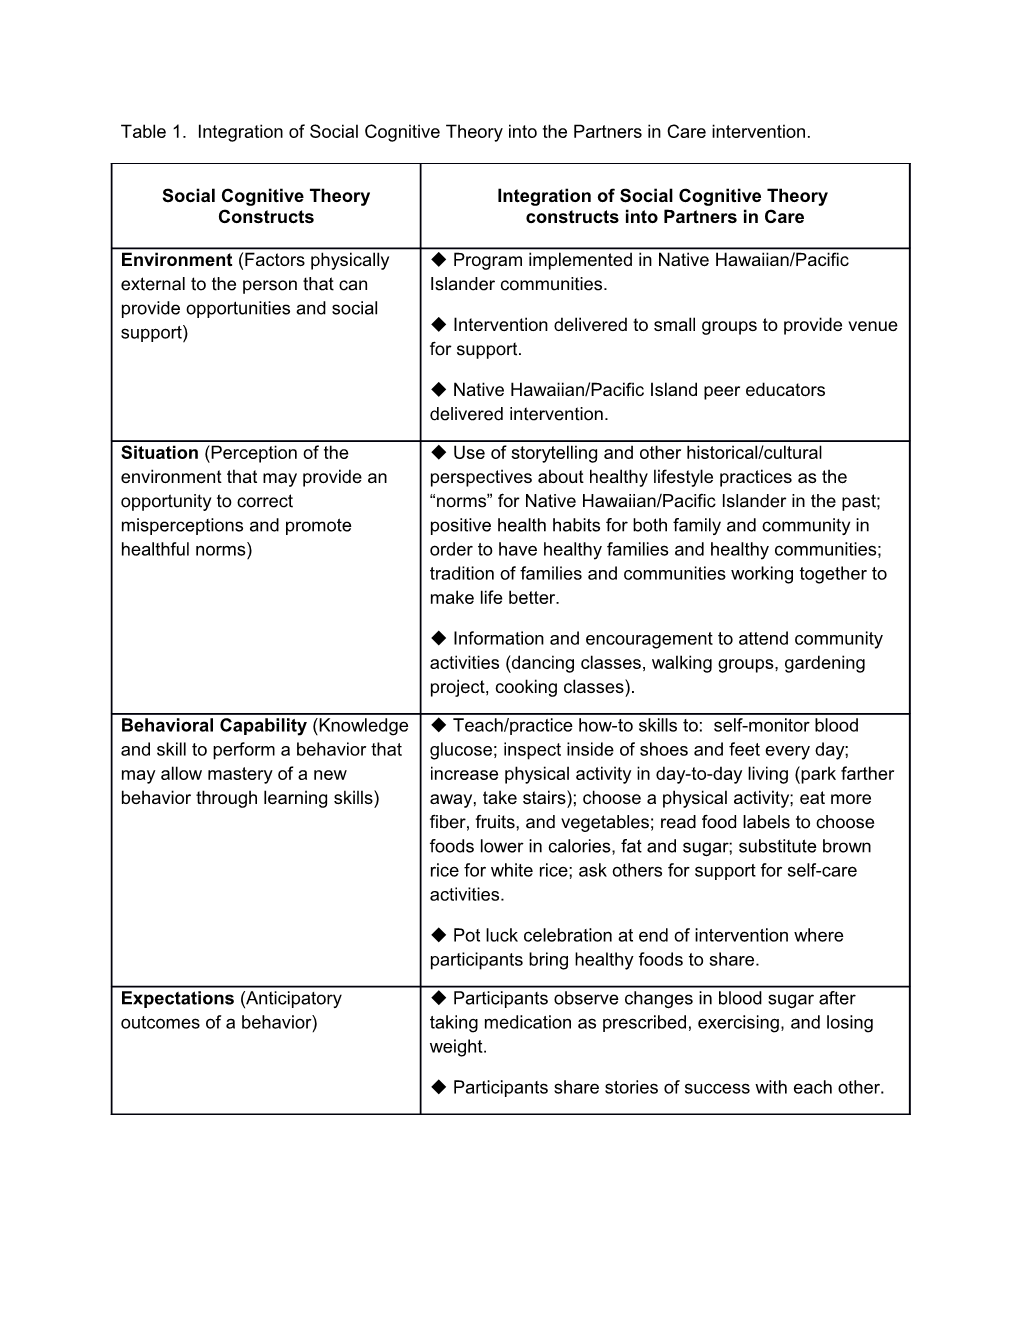 Table 1. Integration of Social Cognitive Theory Into the Partners in Care Intervention